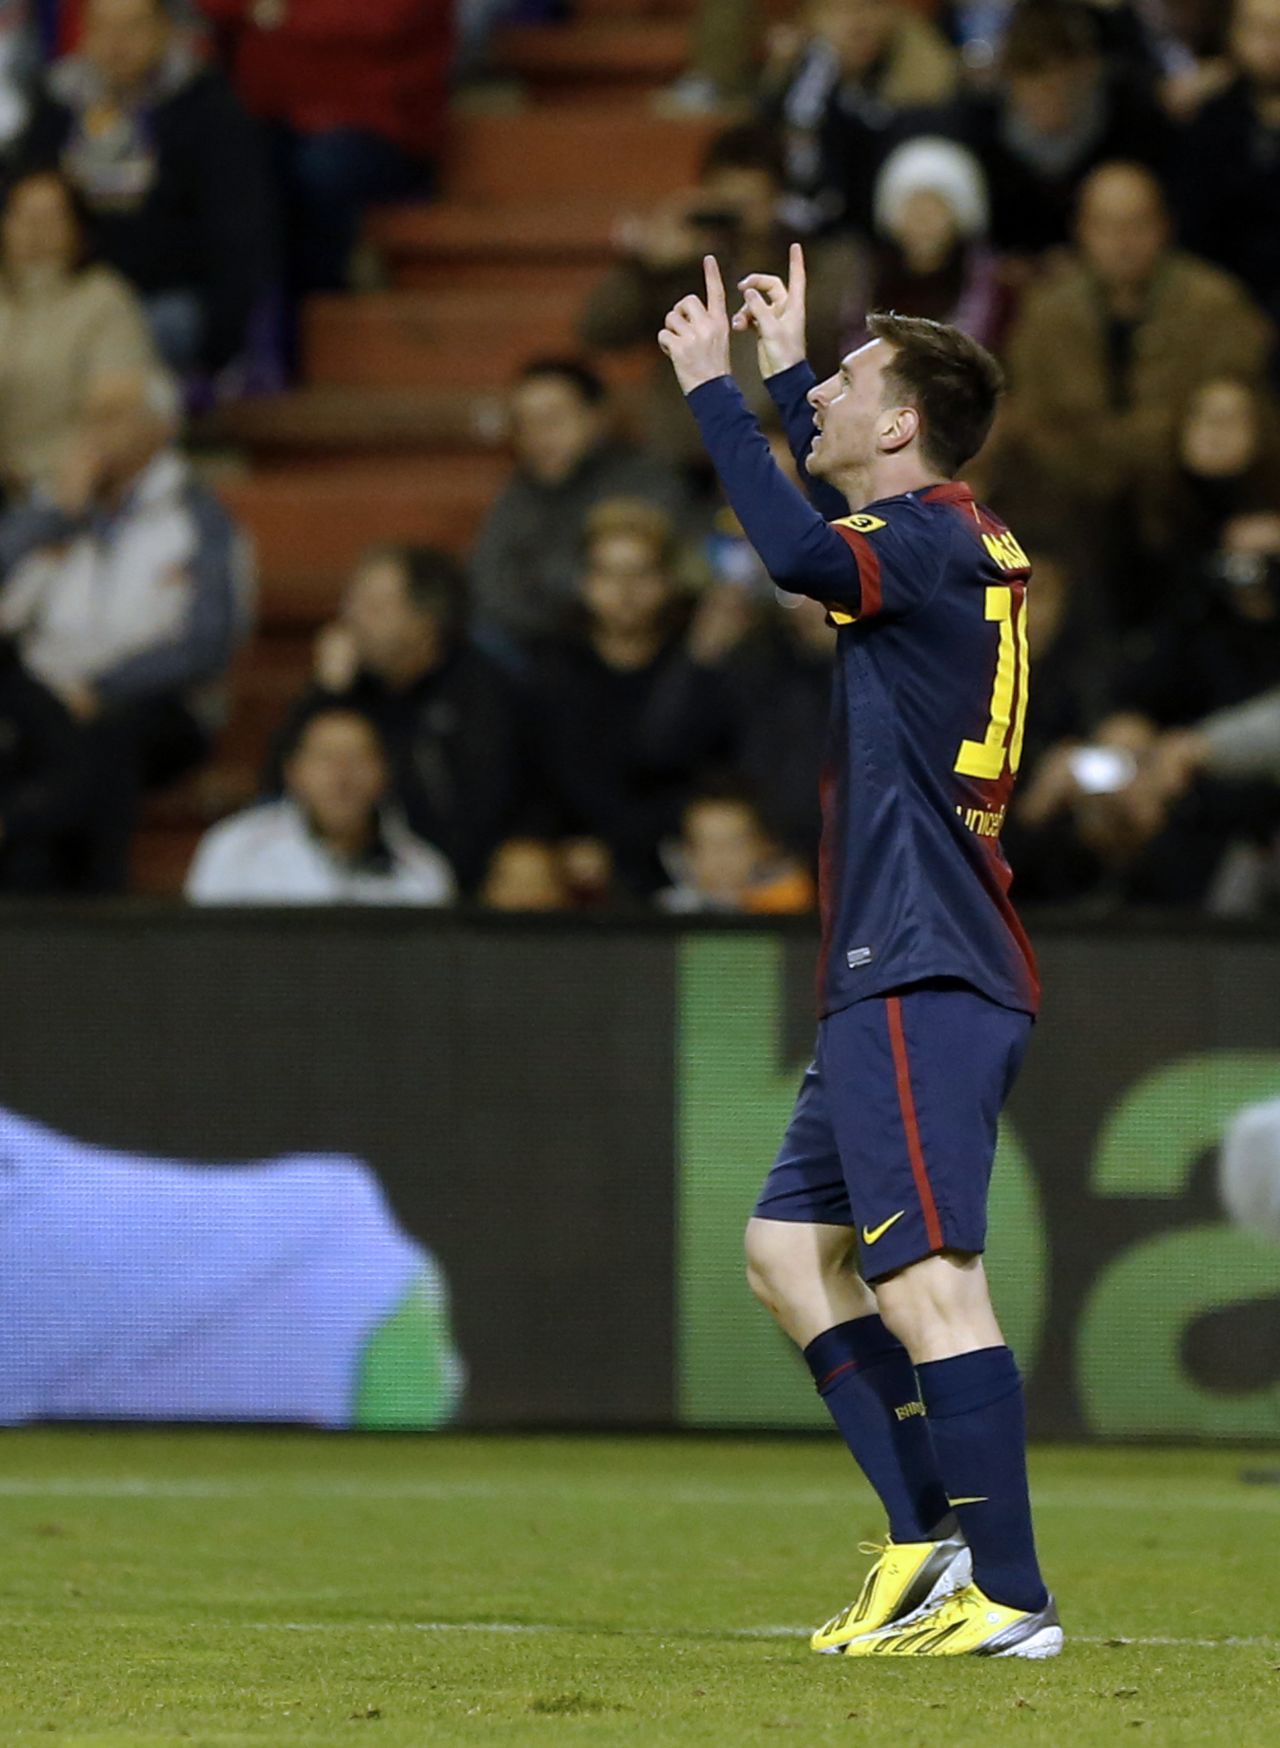 Messi's goalscoring exploits scaled new heights in 2012. A strike against Valladolid on December 22 was his 91st of the calendar year, breaking a record previously held by Germany's Gerd Muller.